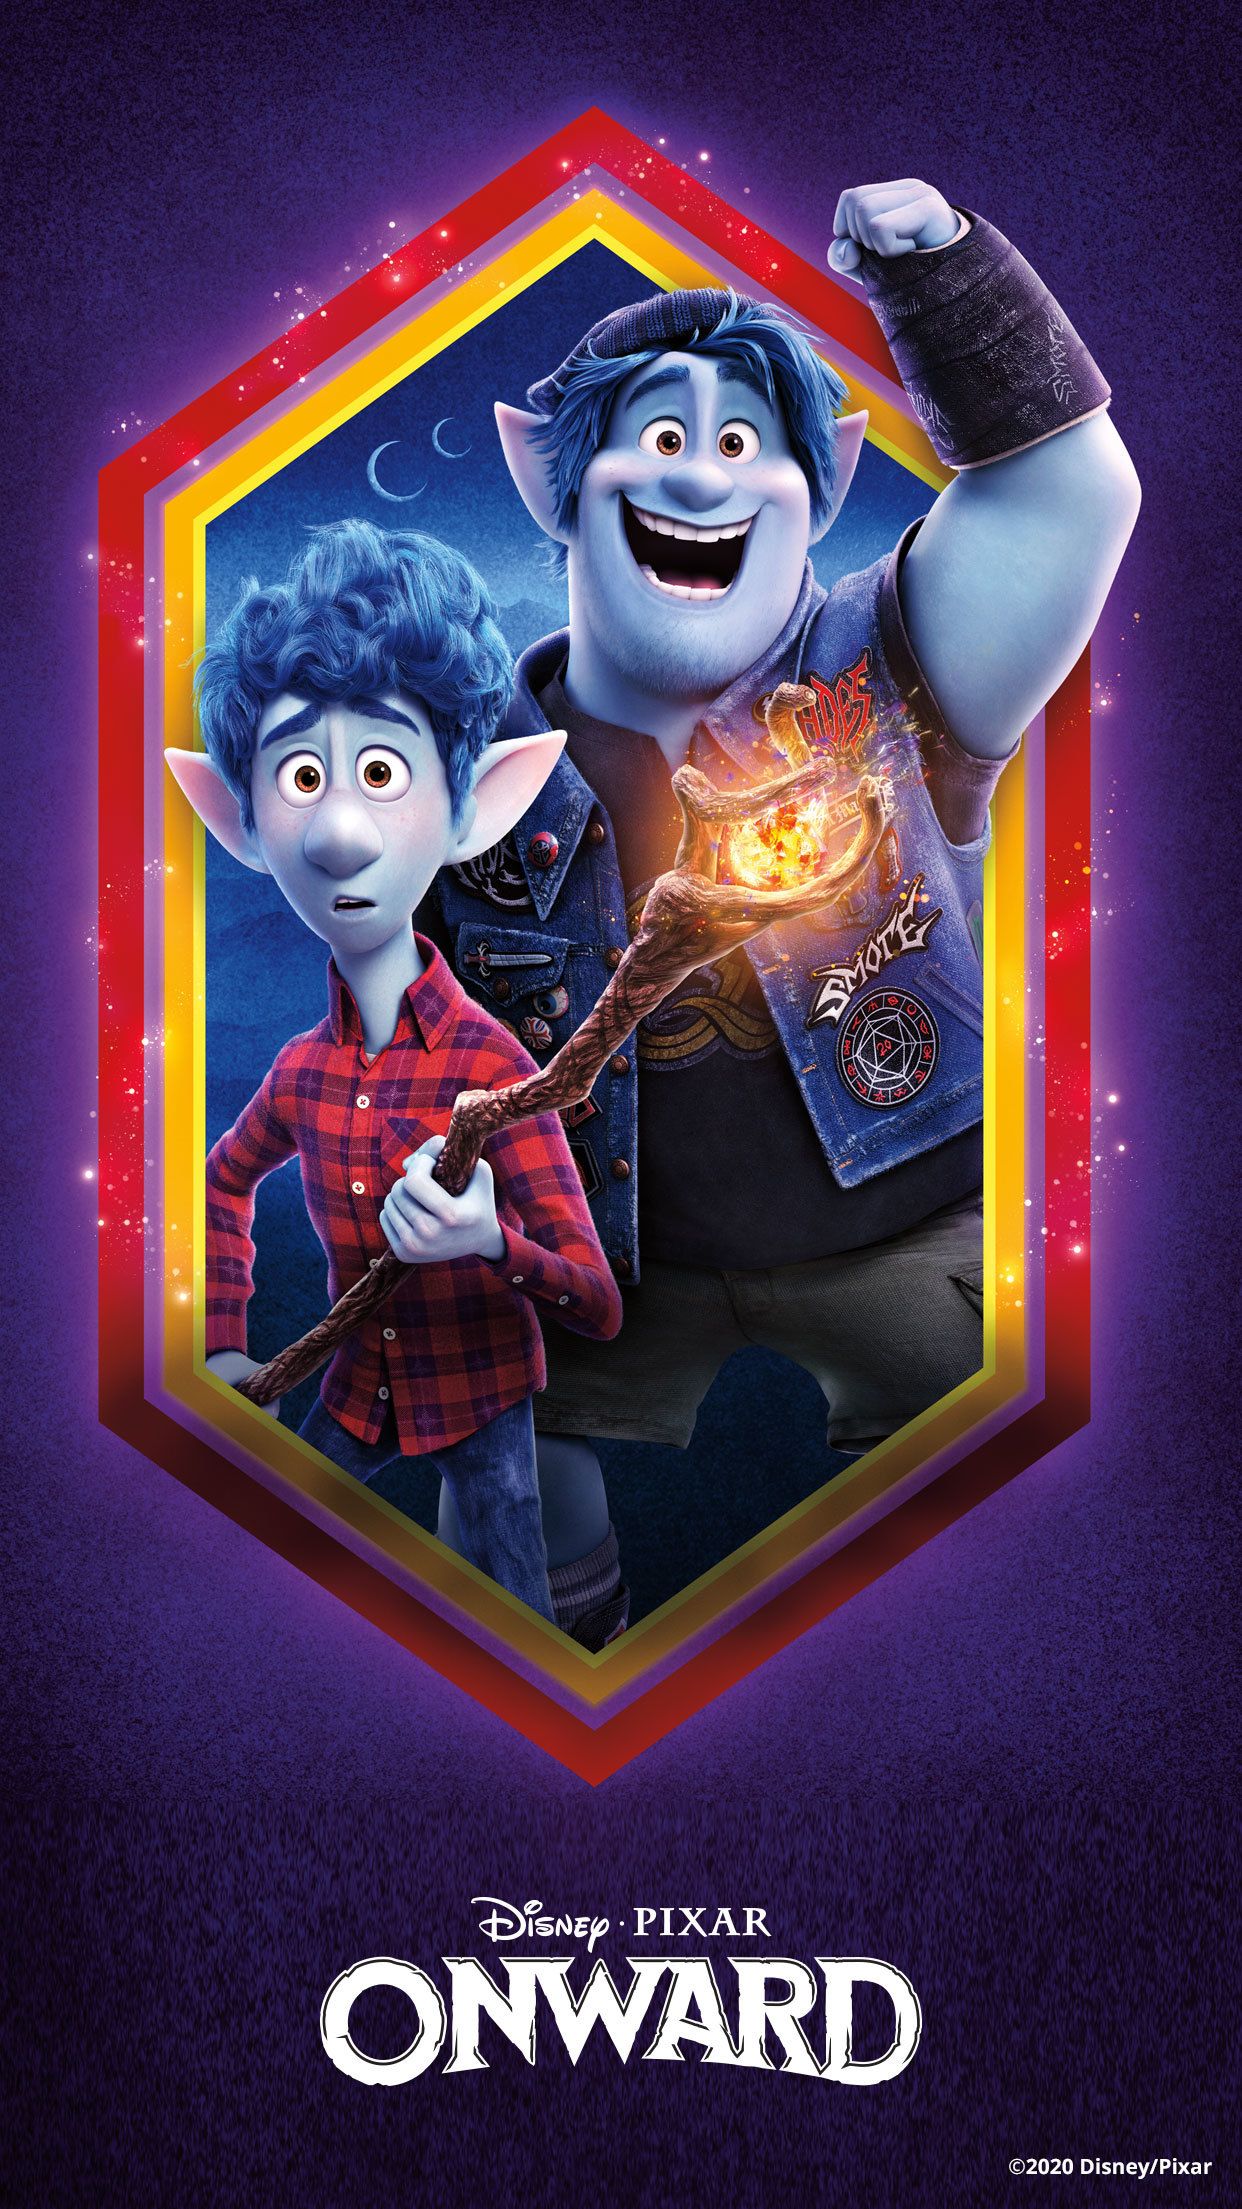 Bringeth Magic To Your Mobile Device With Disney And Pixar’s